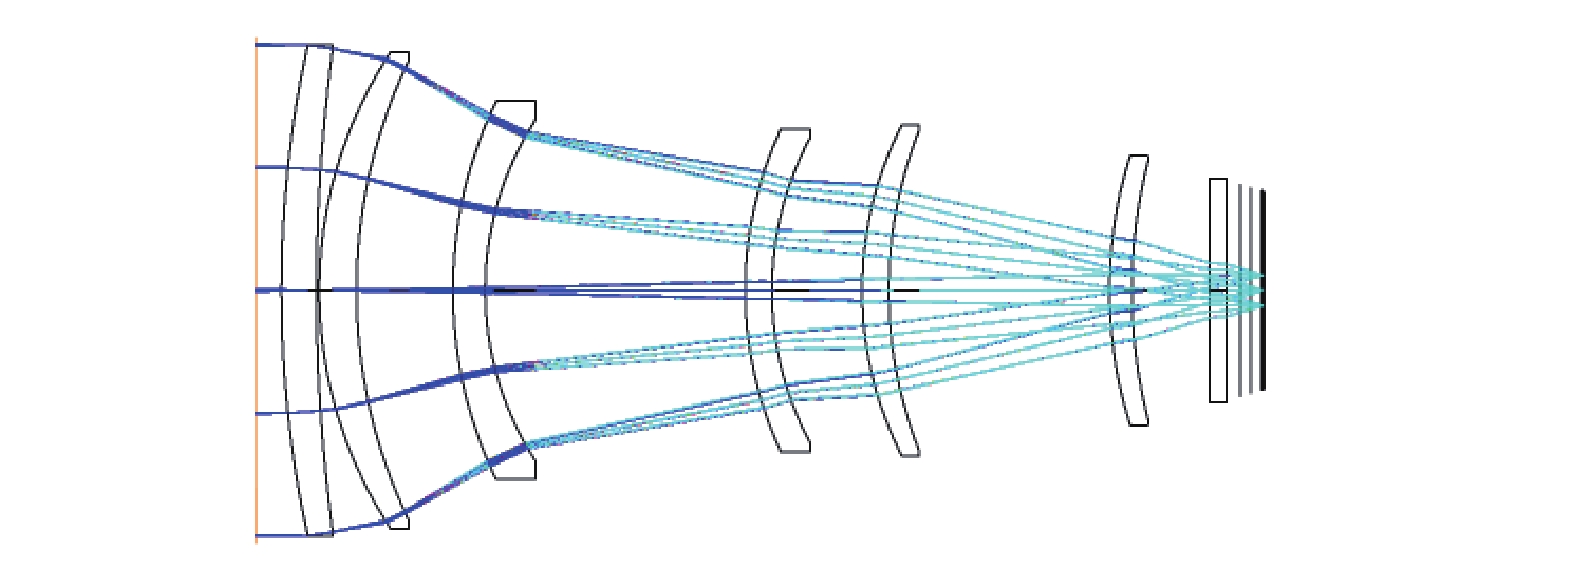 Optical system layout